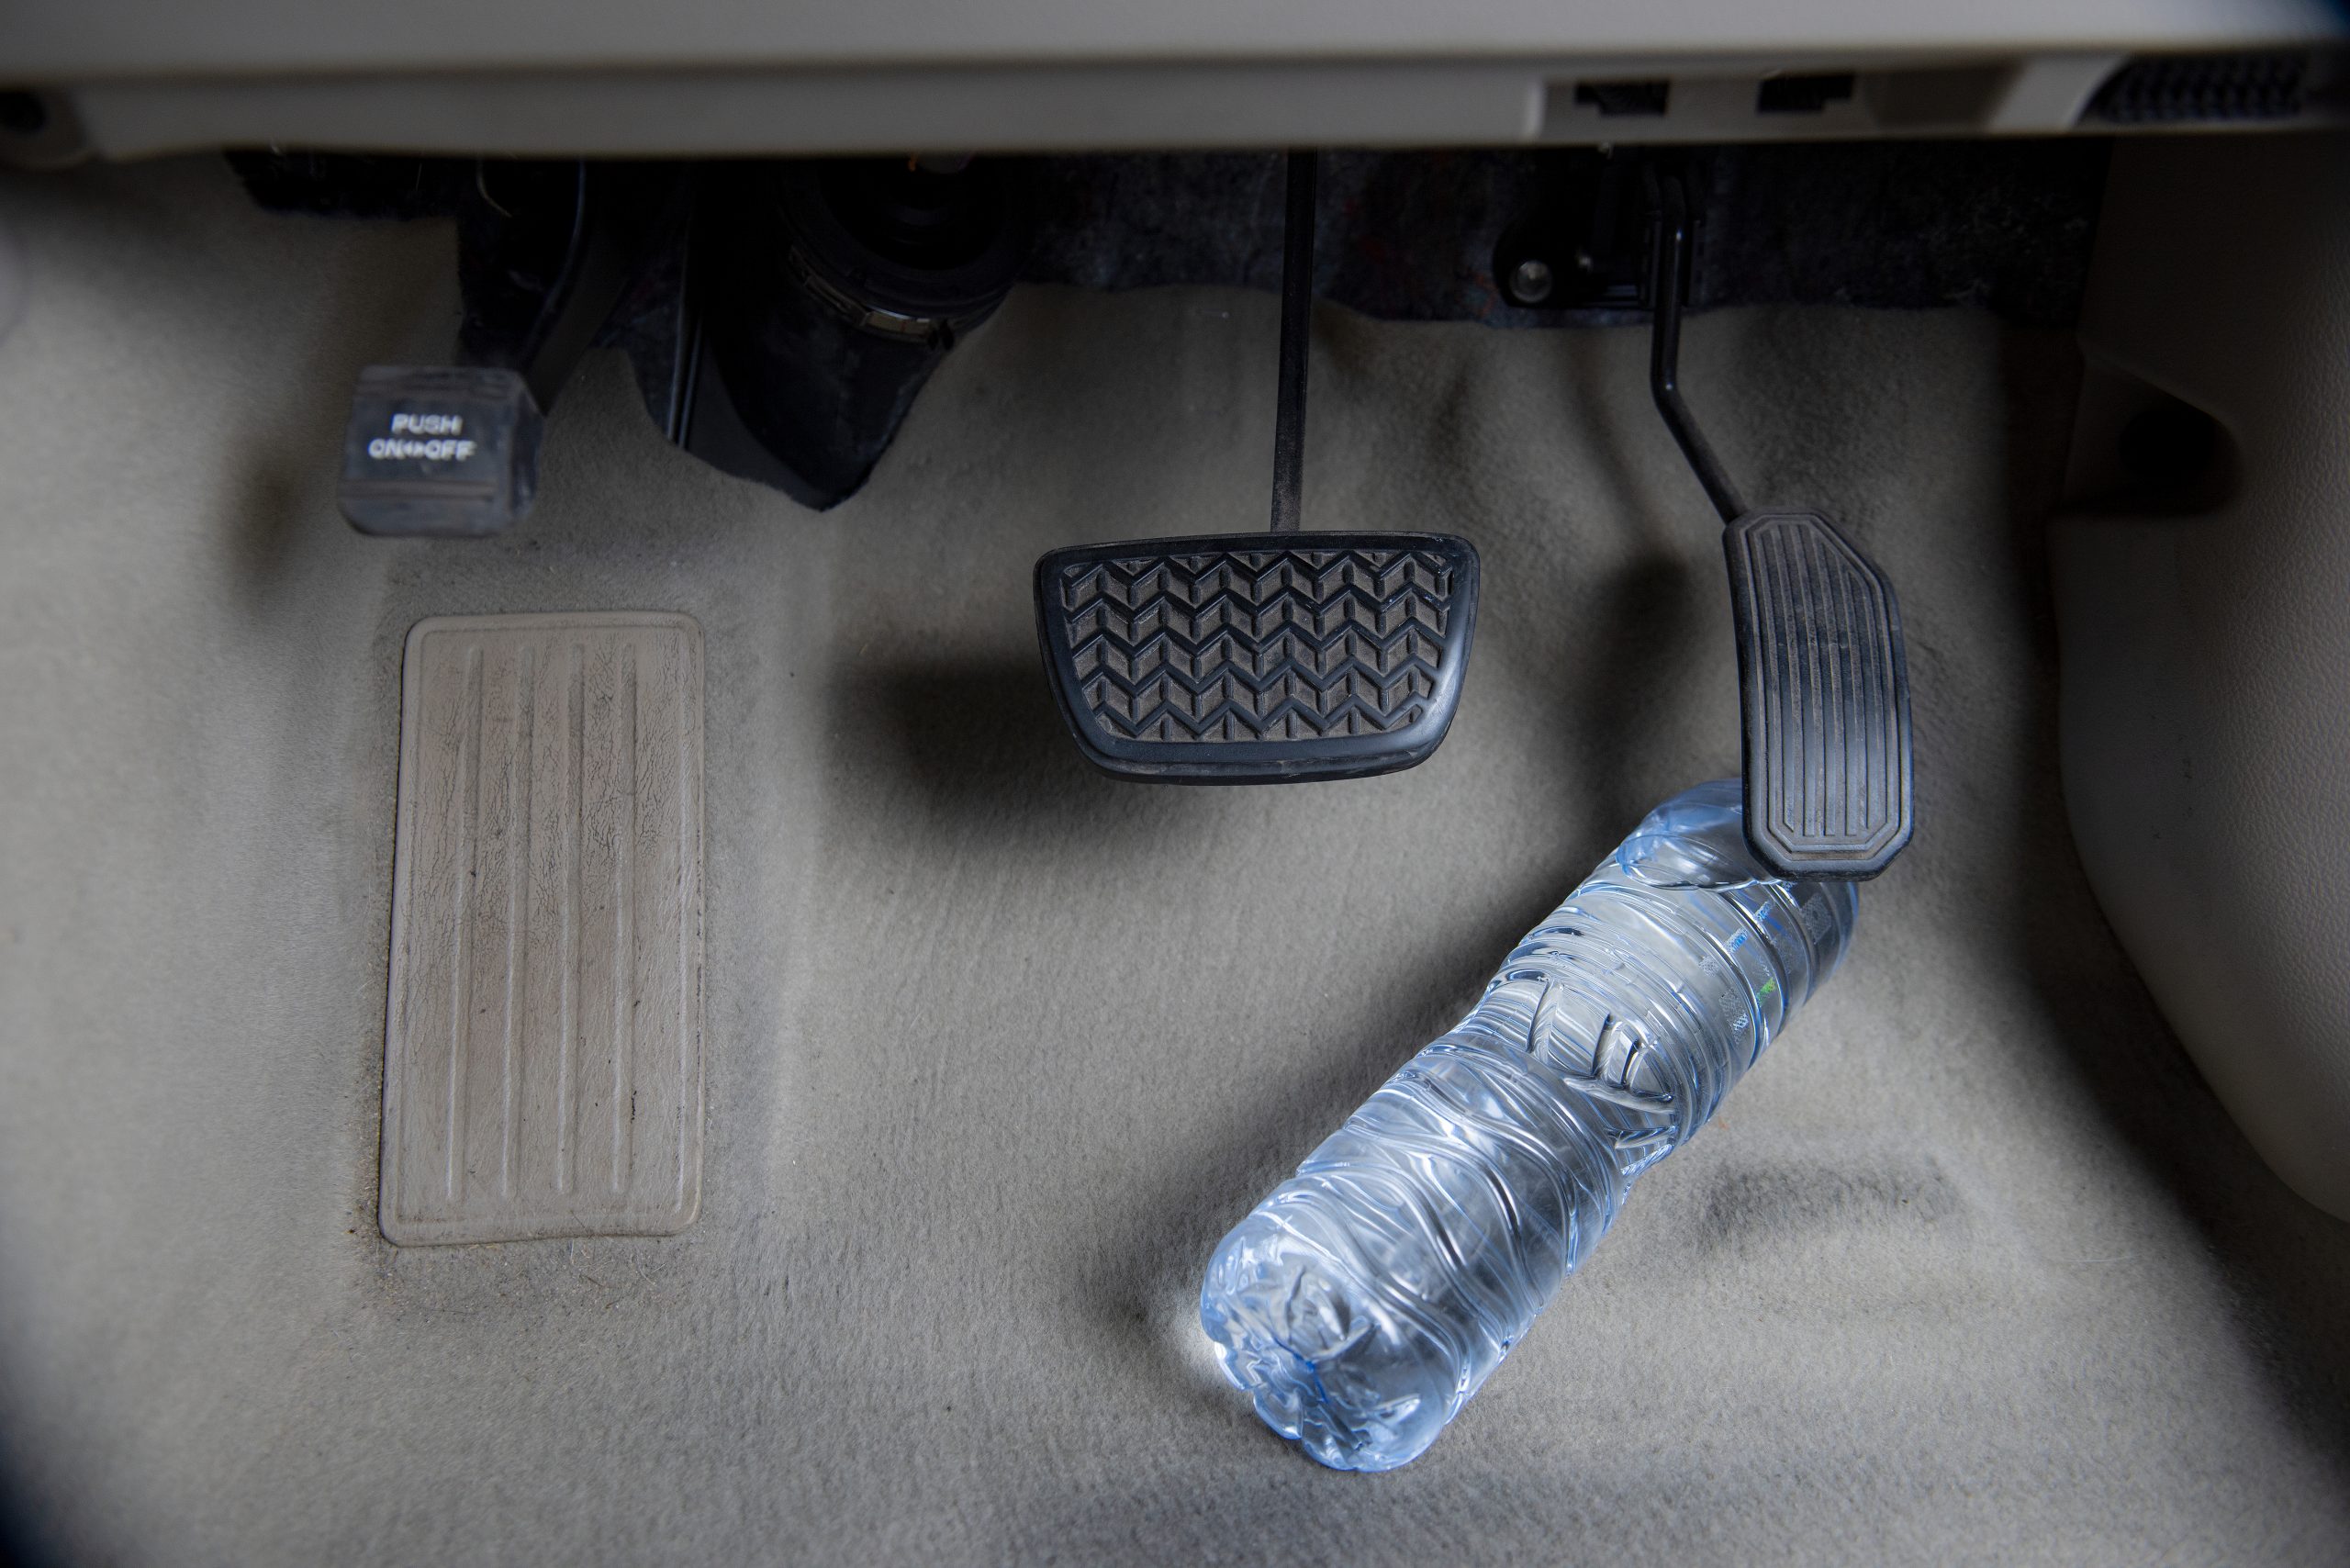 How Does A Gas Pedal Work? 